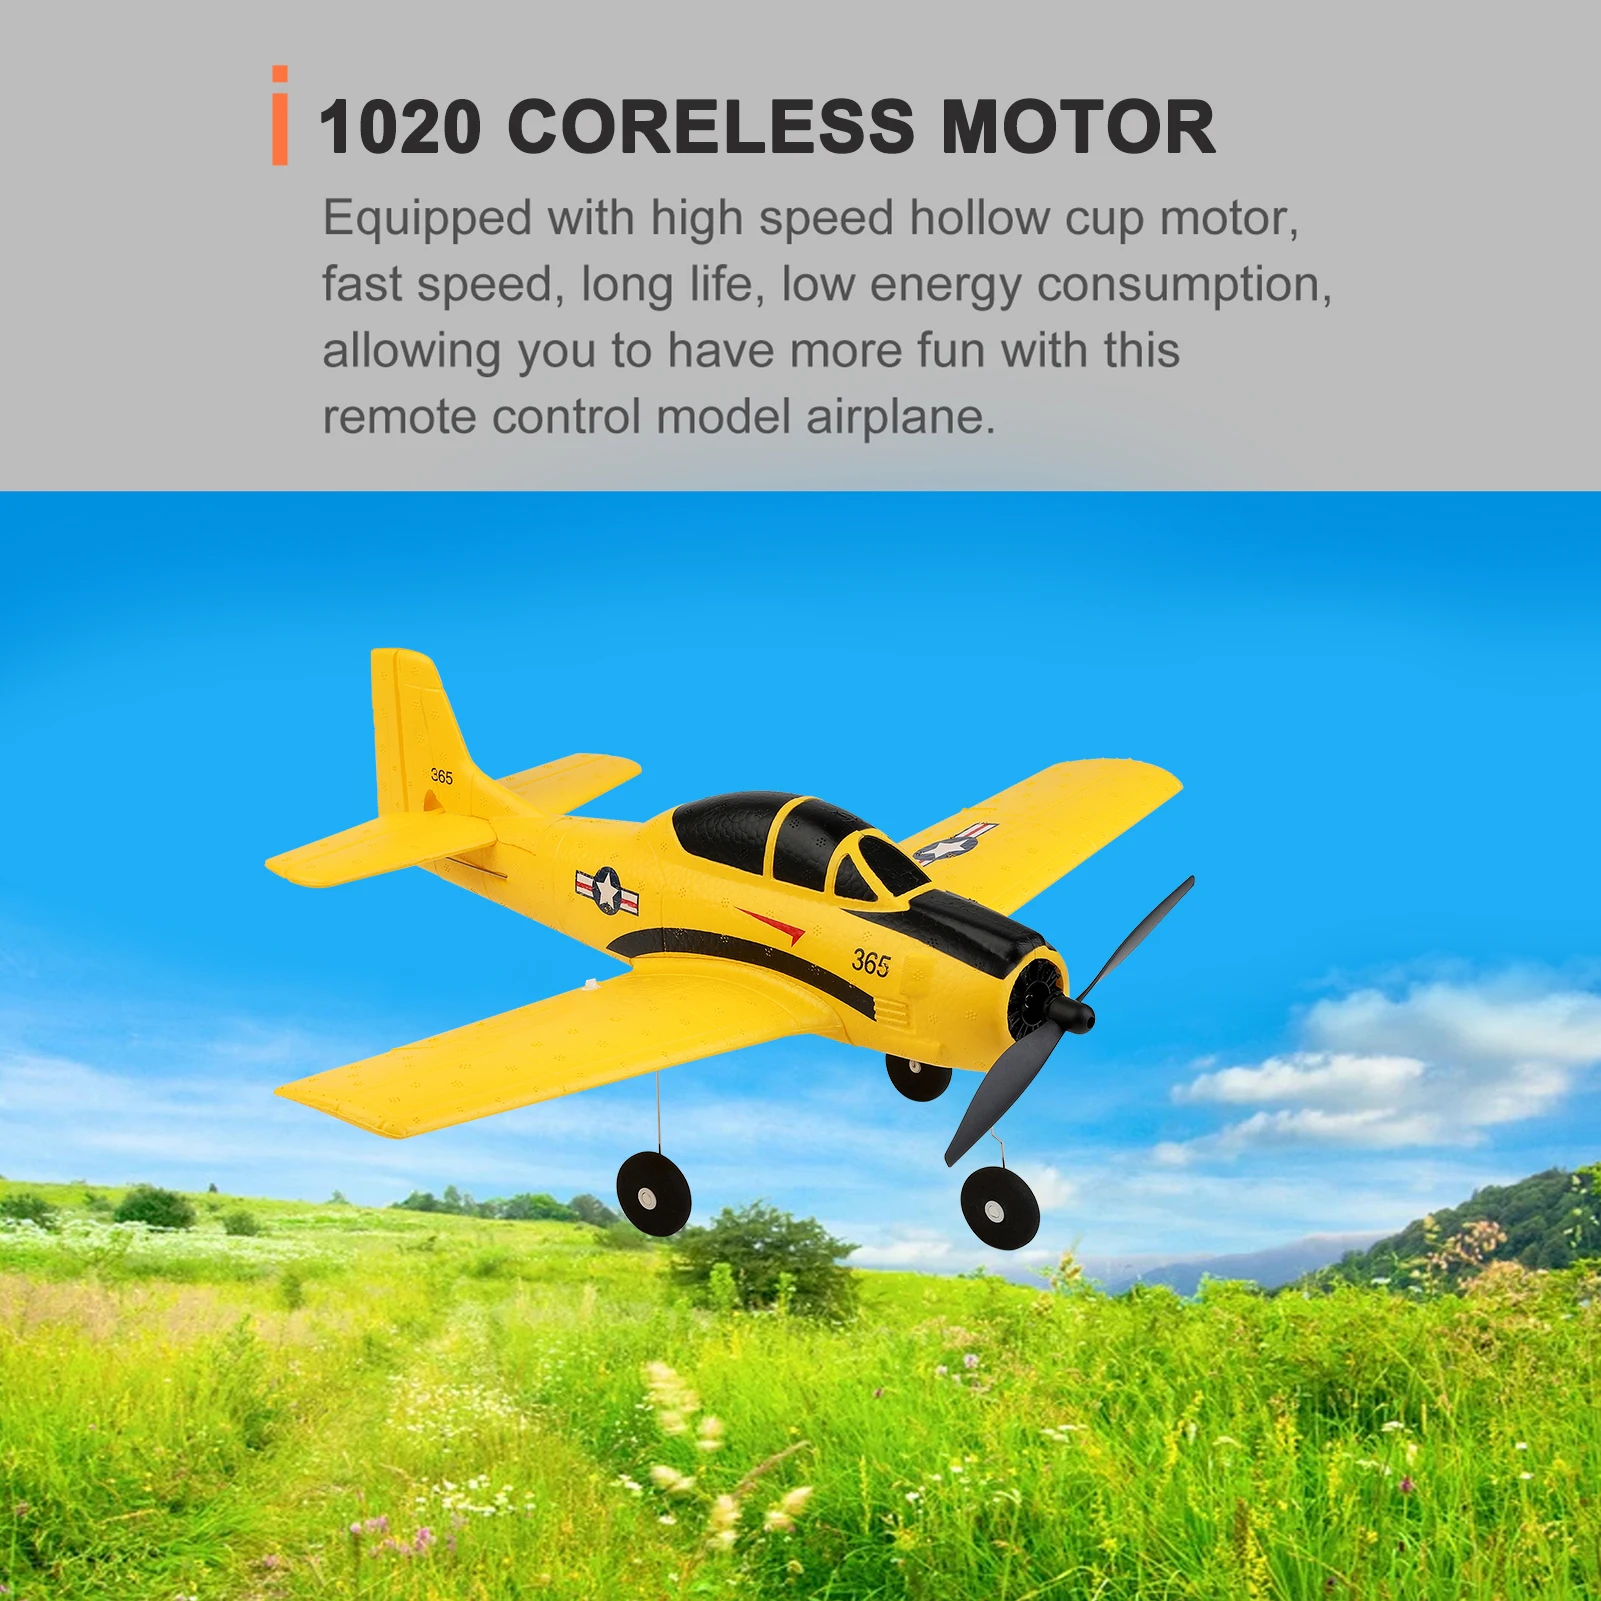 Hot XK WLtoys A210 T28 2.4G Remote Control Airplane 6 Axis Simple Operation EPP Foam 4CH RC Plane Aircraft Drone Toys For Kids